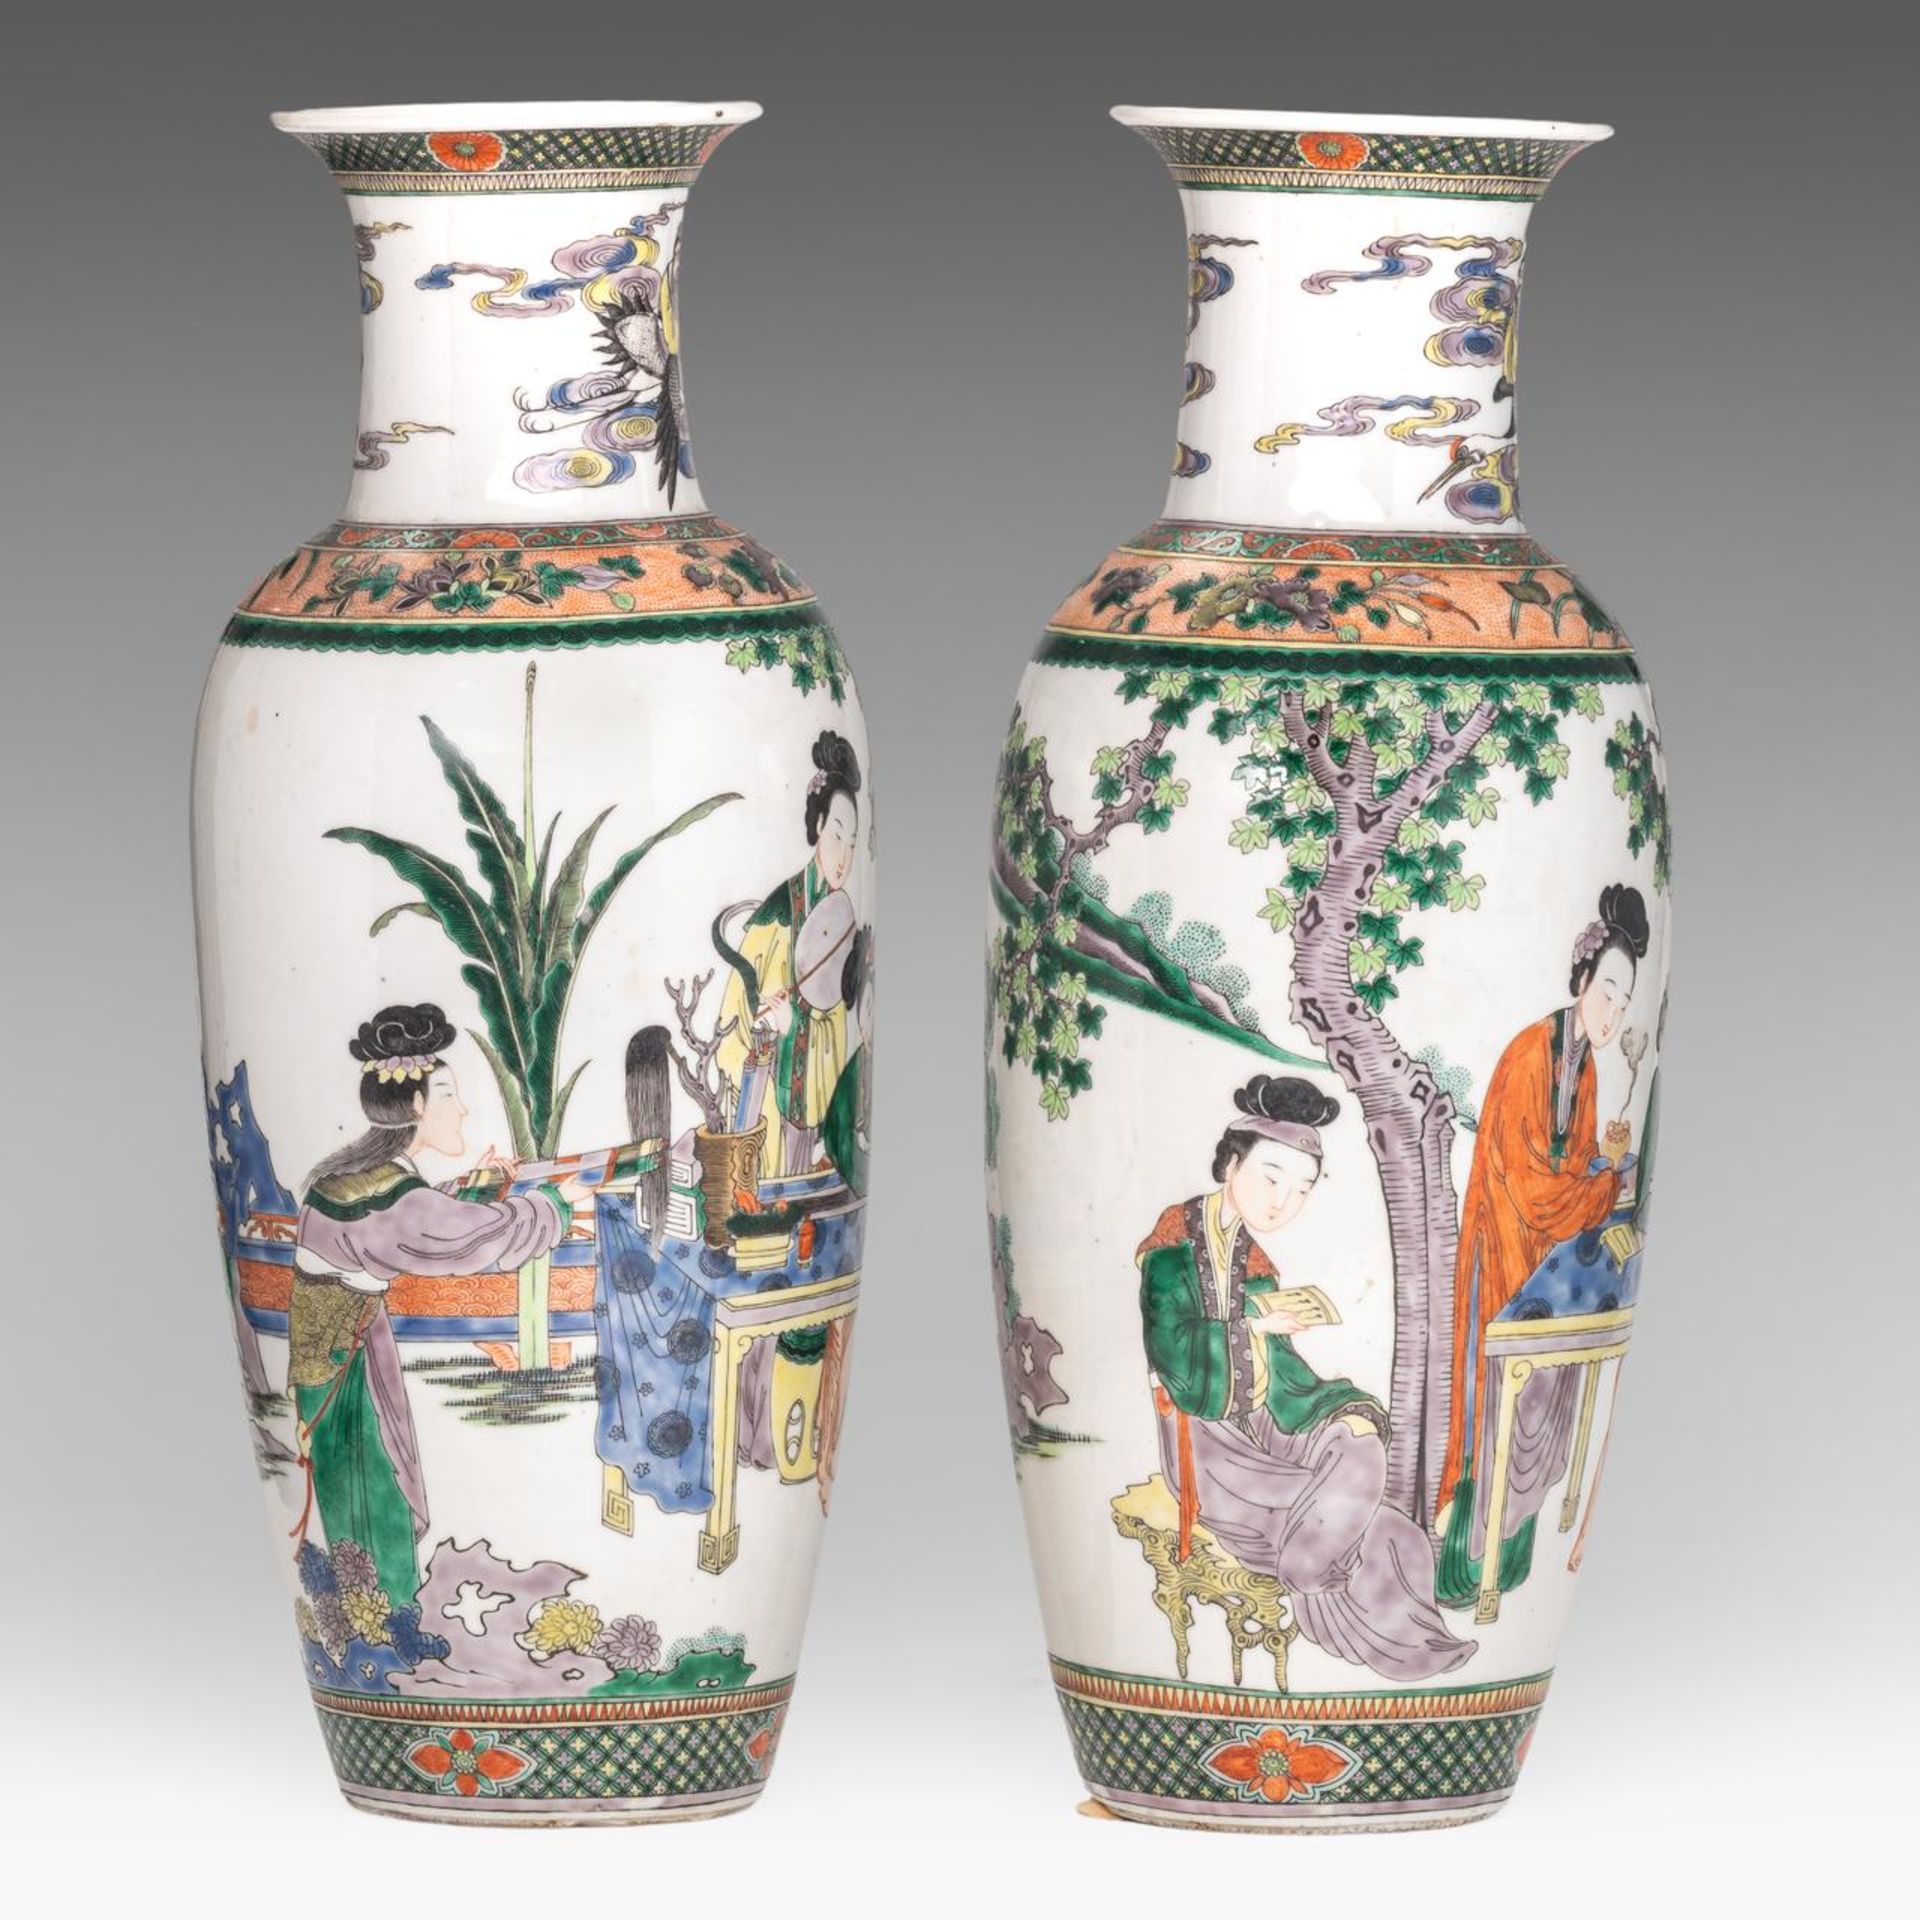 A pair of Chinese famille verte 'Ladies in a garden' vases, Guangxu/ Republic period, H 46,5 cm - Image 4 of 6